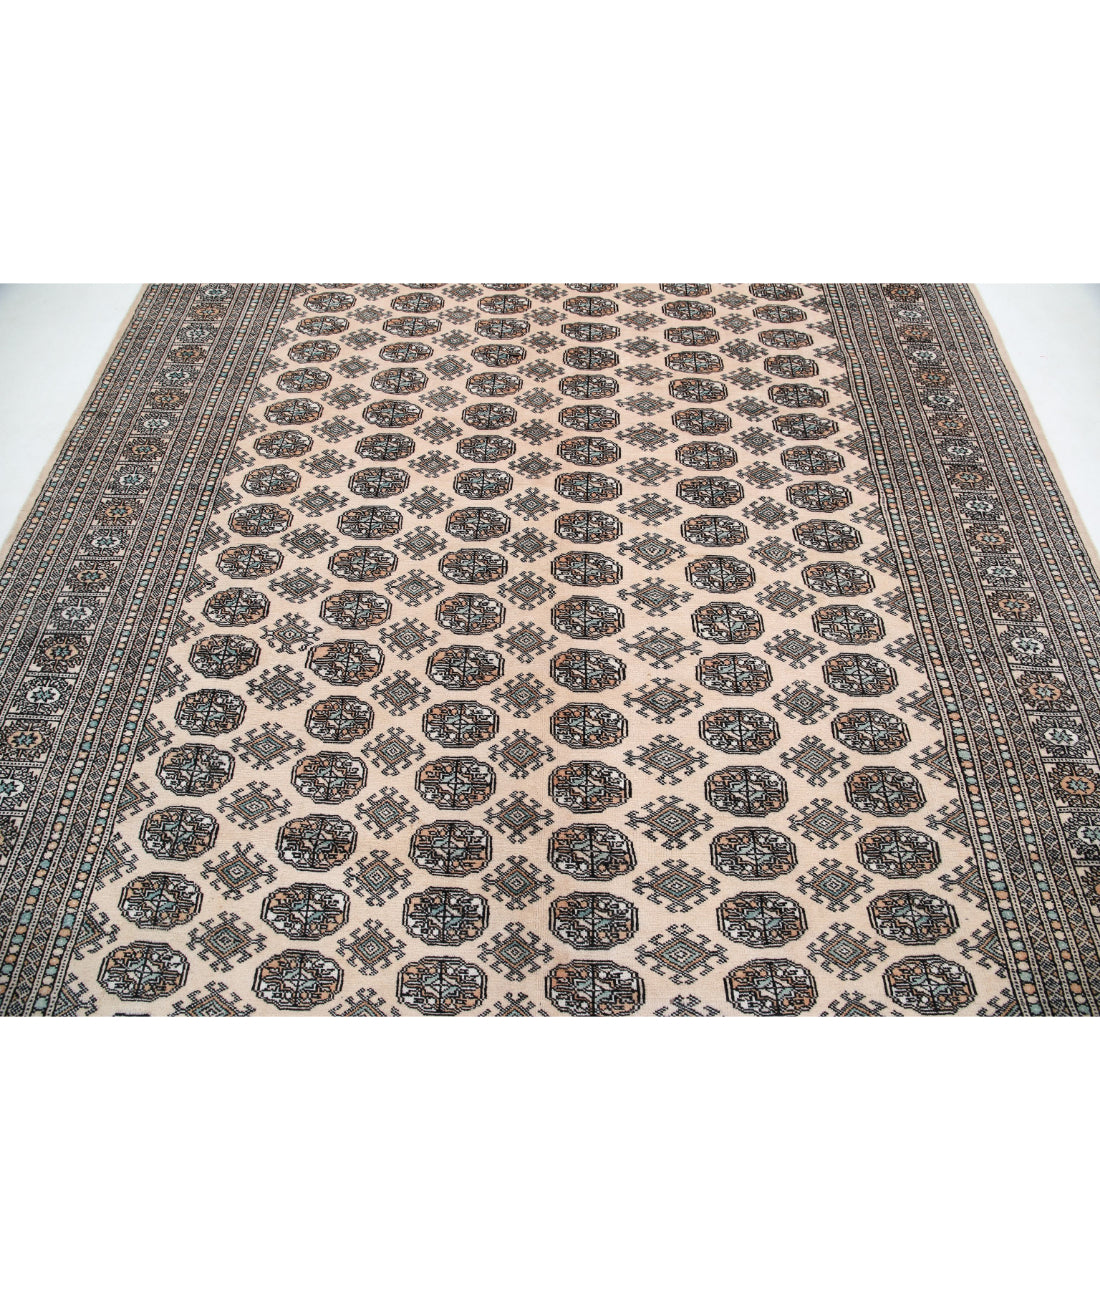 Hand Knotted Tribal Bokhara Wool Rug - 7'10'' x 10'2'' 7'10'' x 10'2'' (235 X 305) / Ivory / Taupe